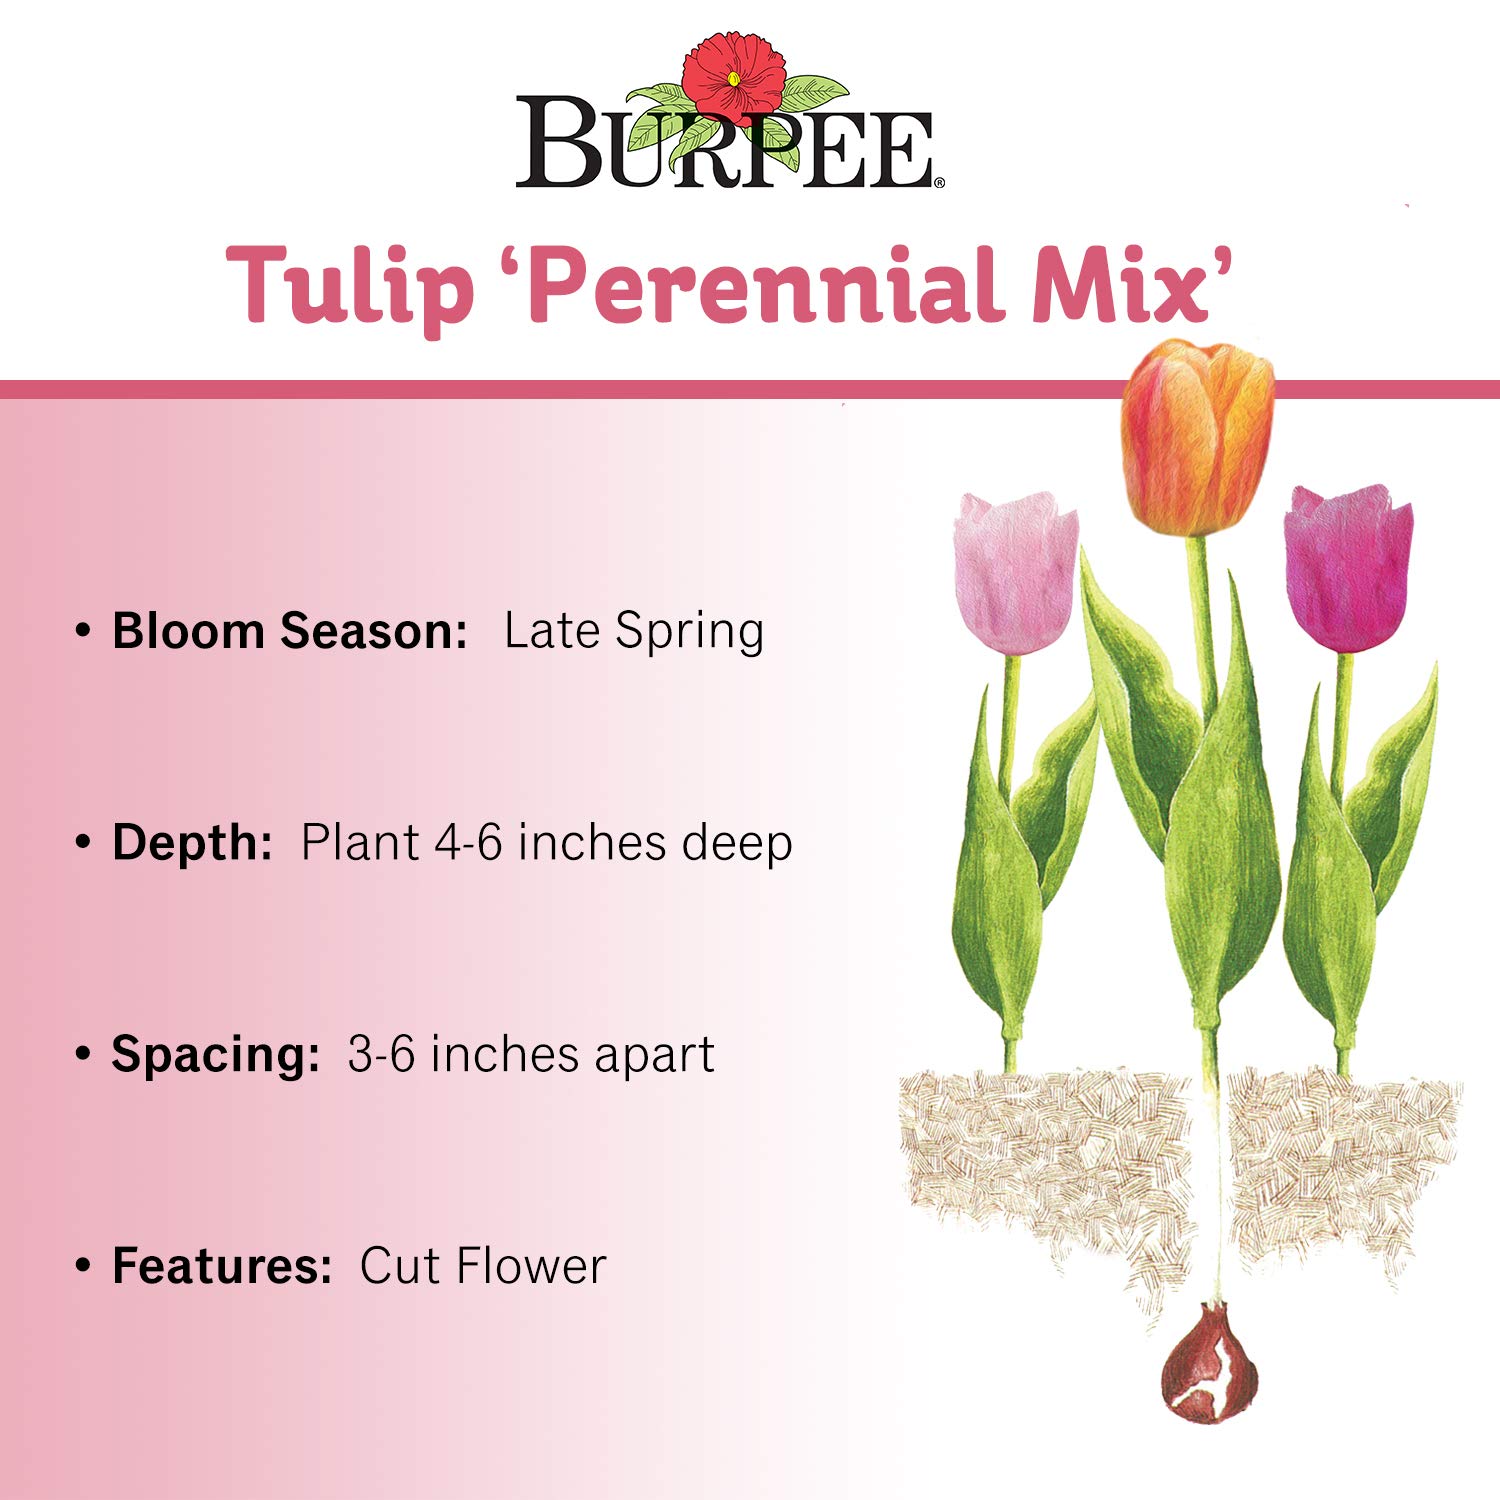 Burpee Perennial Tulip Mix | 20 Large Flowering Fall Bulbs for Planting, Multiple Colors